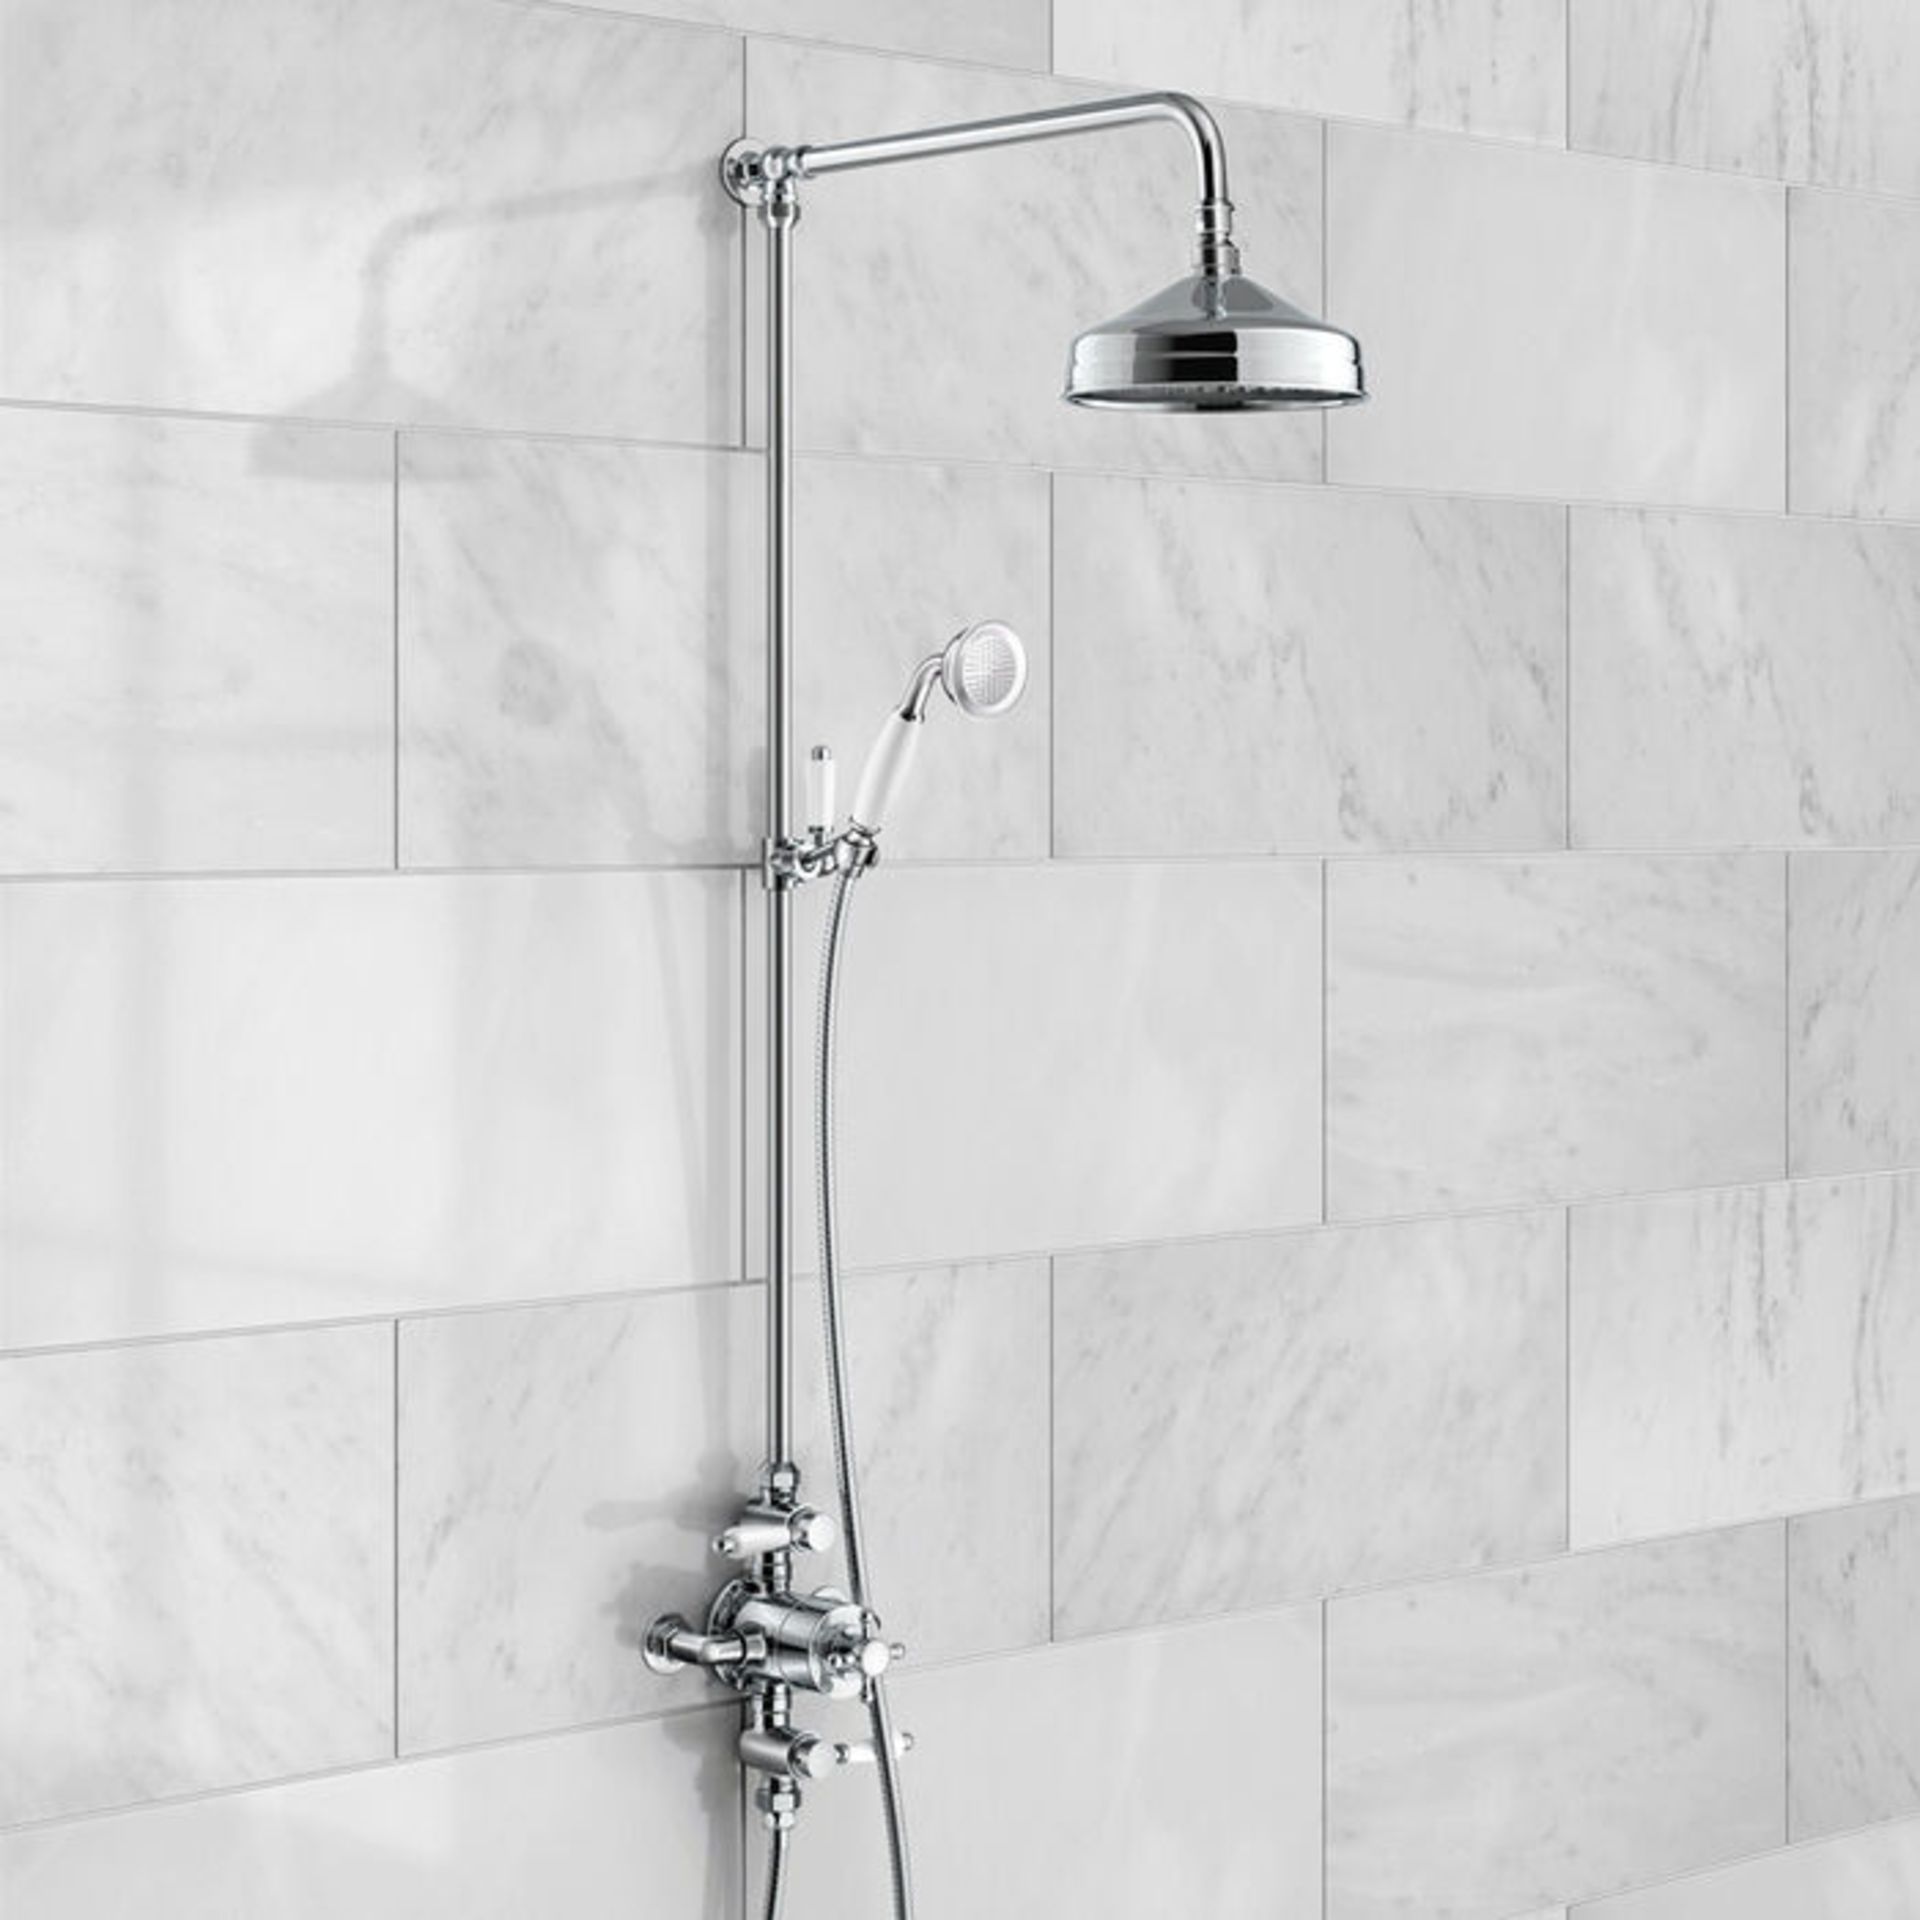 (JL9) Traditional Exposed Shower Kit & Medium Head- Melbourne. RRP £489.99. Traditional expose... - Image 3 of 4